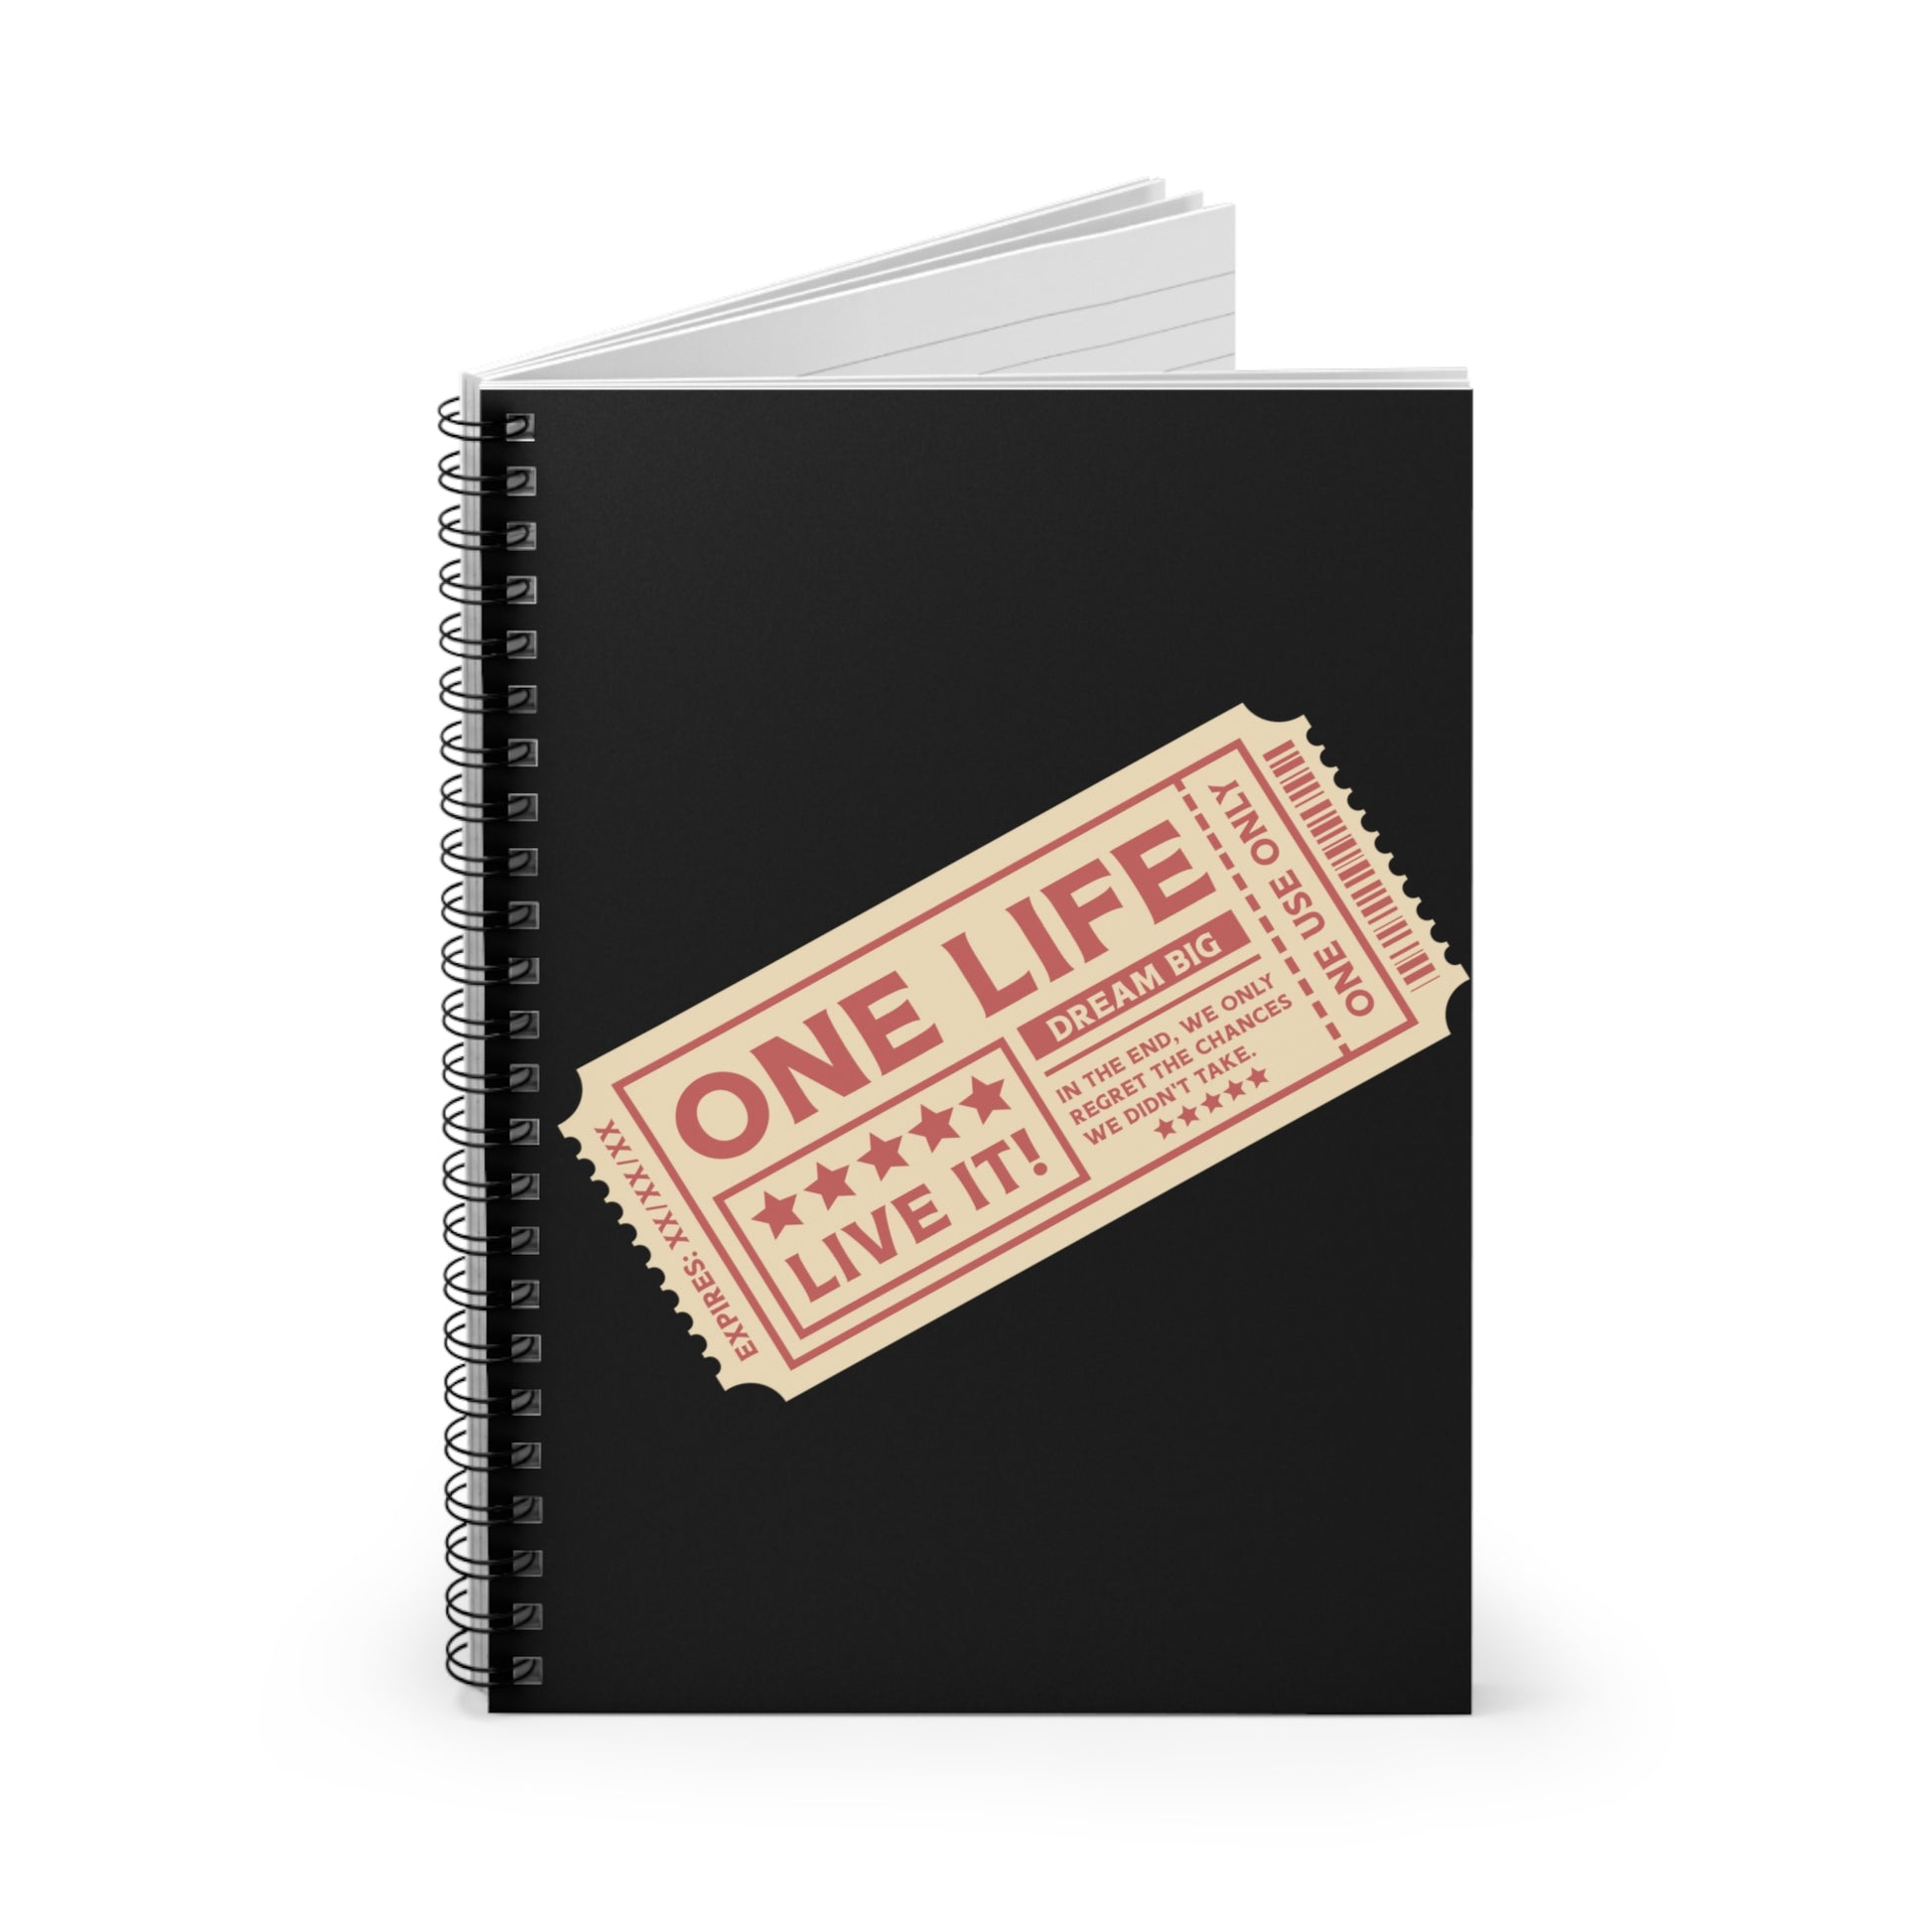 Ticket to Life: Spiral Notebook - Log Books - Journals - Diaries - and More Custom Printed by TheGlassyLass.com